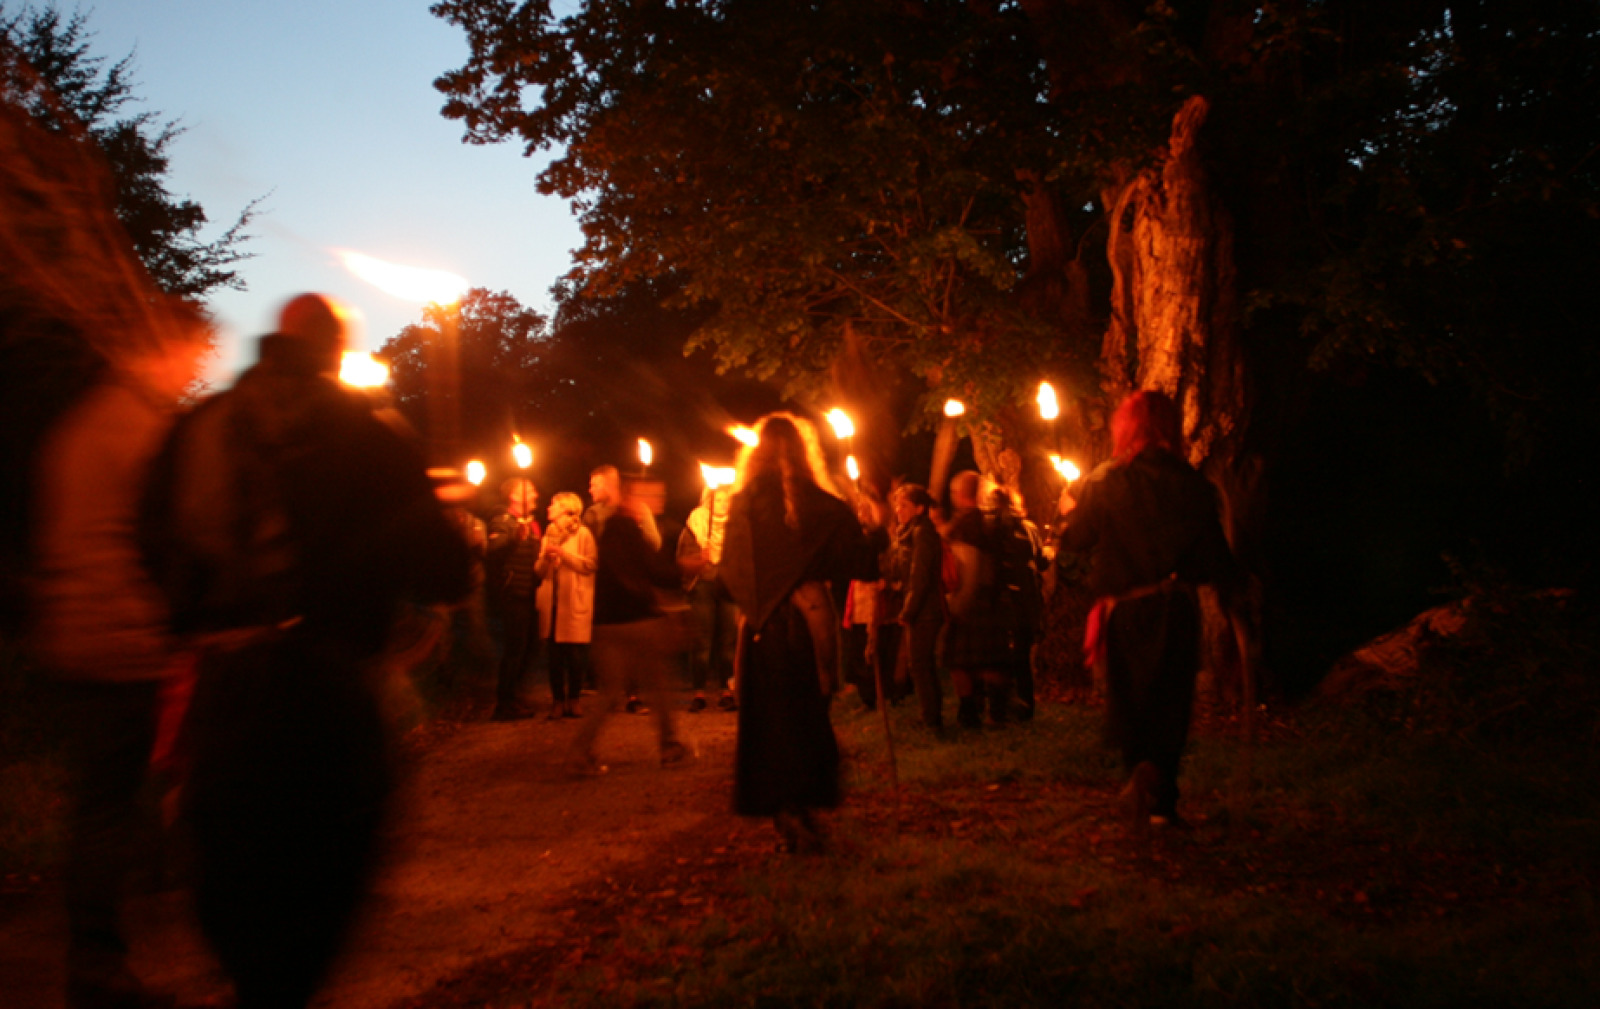 Gathering of the carnival group by torchlight